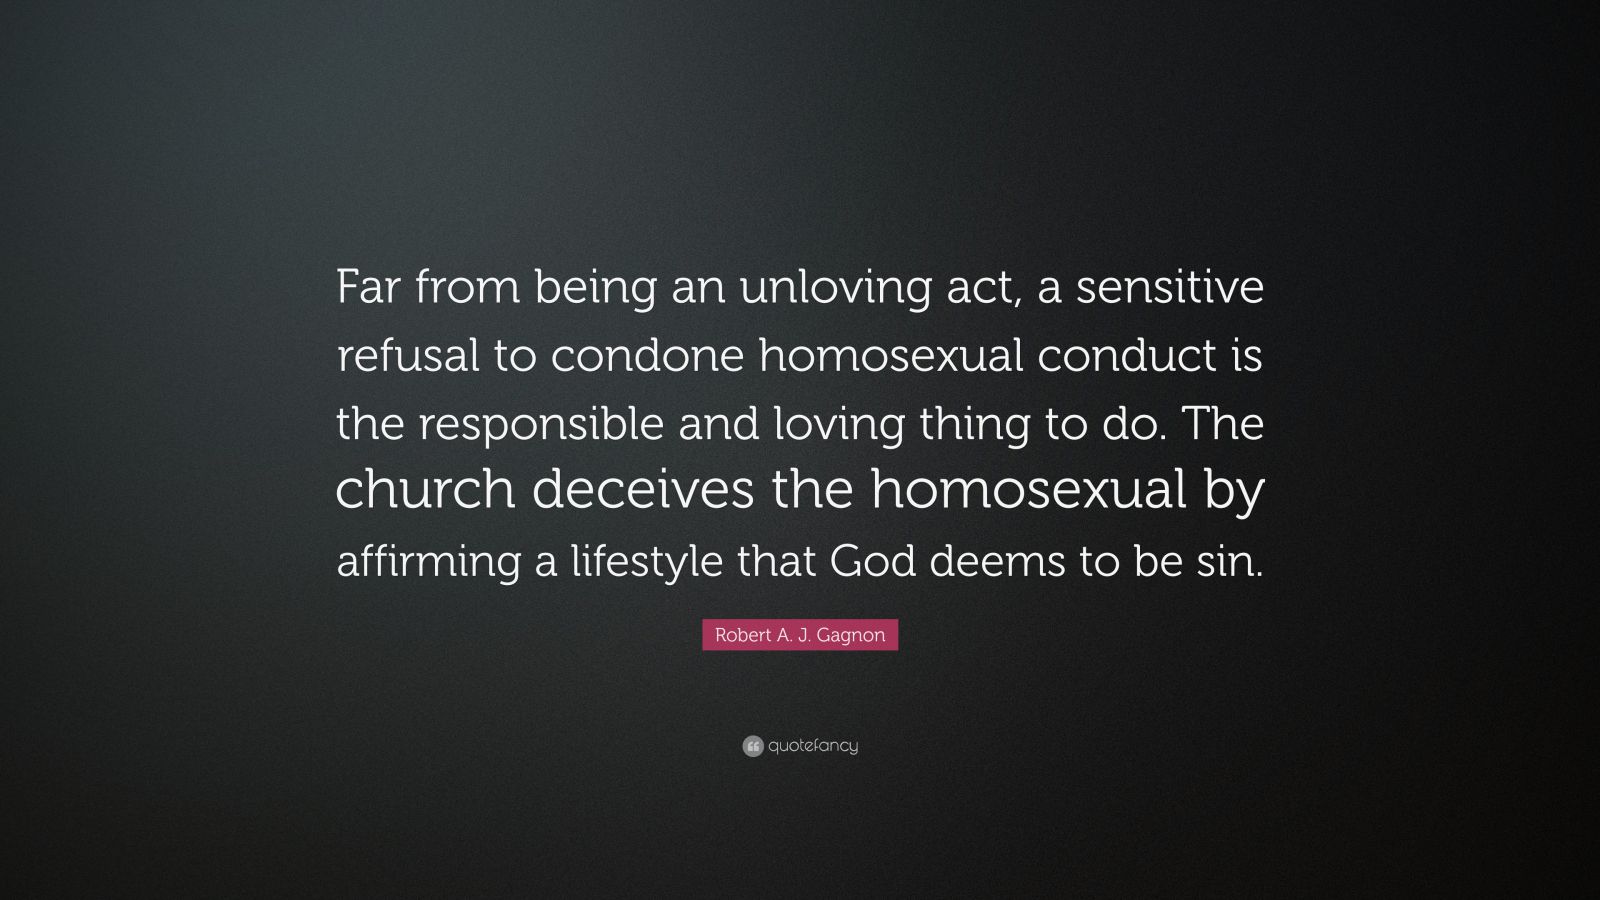 Robert A J Gagnon Quote “far From Being An Unloving Act A Sensitive Refusal To Condone